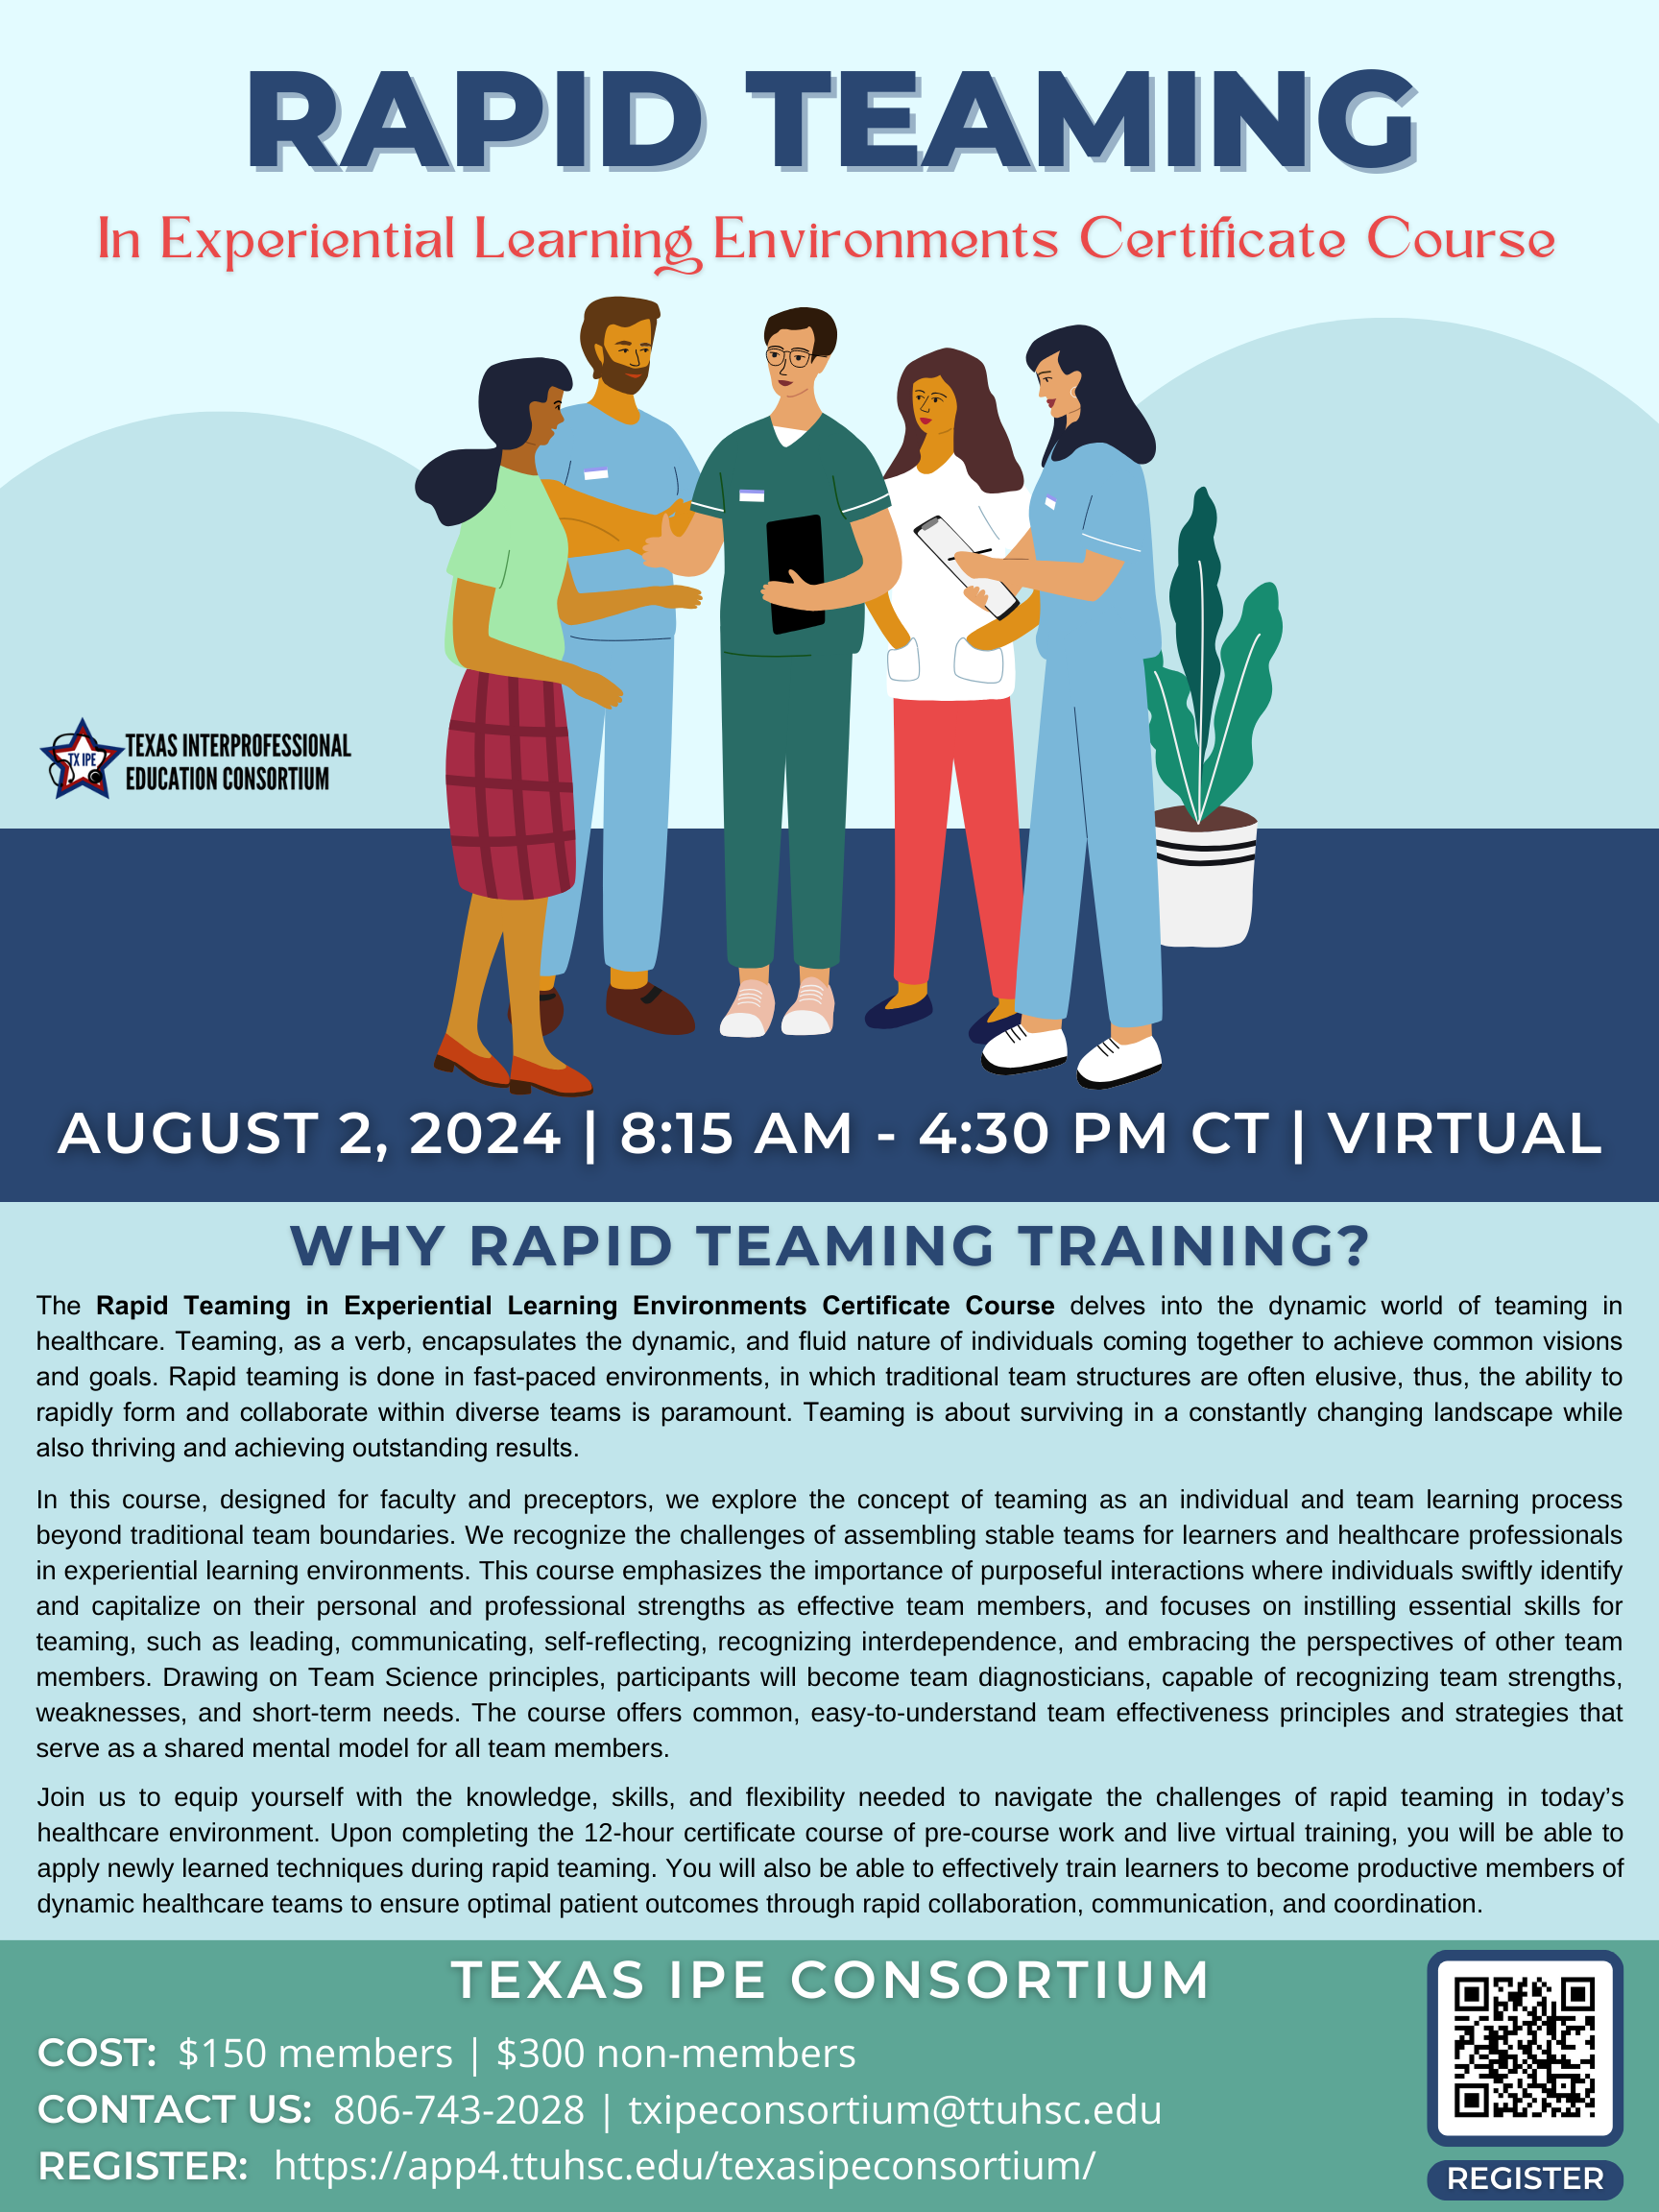 Rapid Teaming in Experiential Learning Environments Course August 2, 2024 8:15 AM to 4:30 PM CT